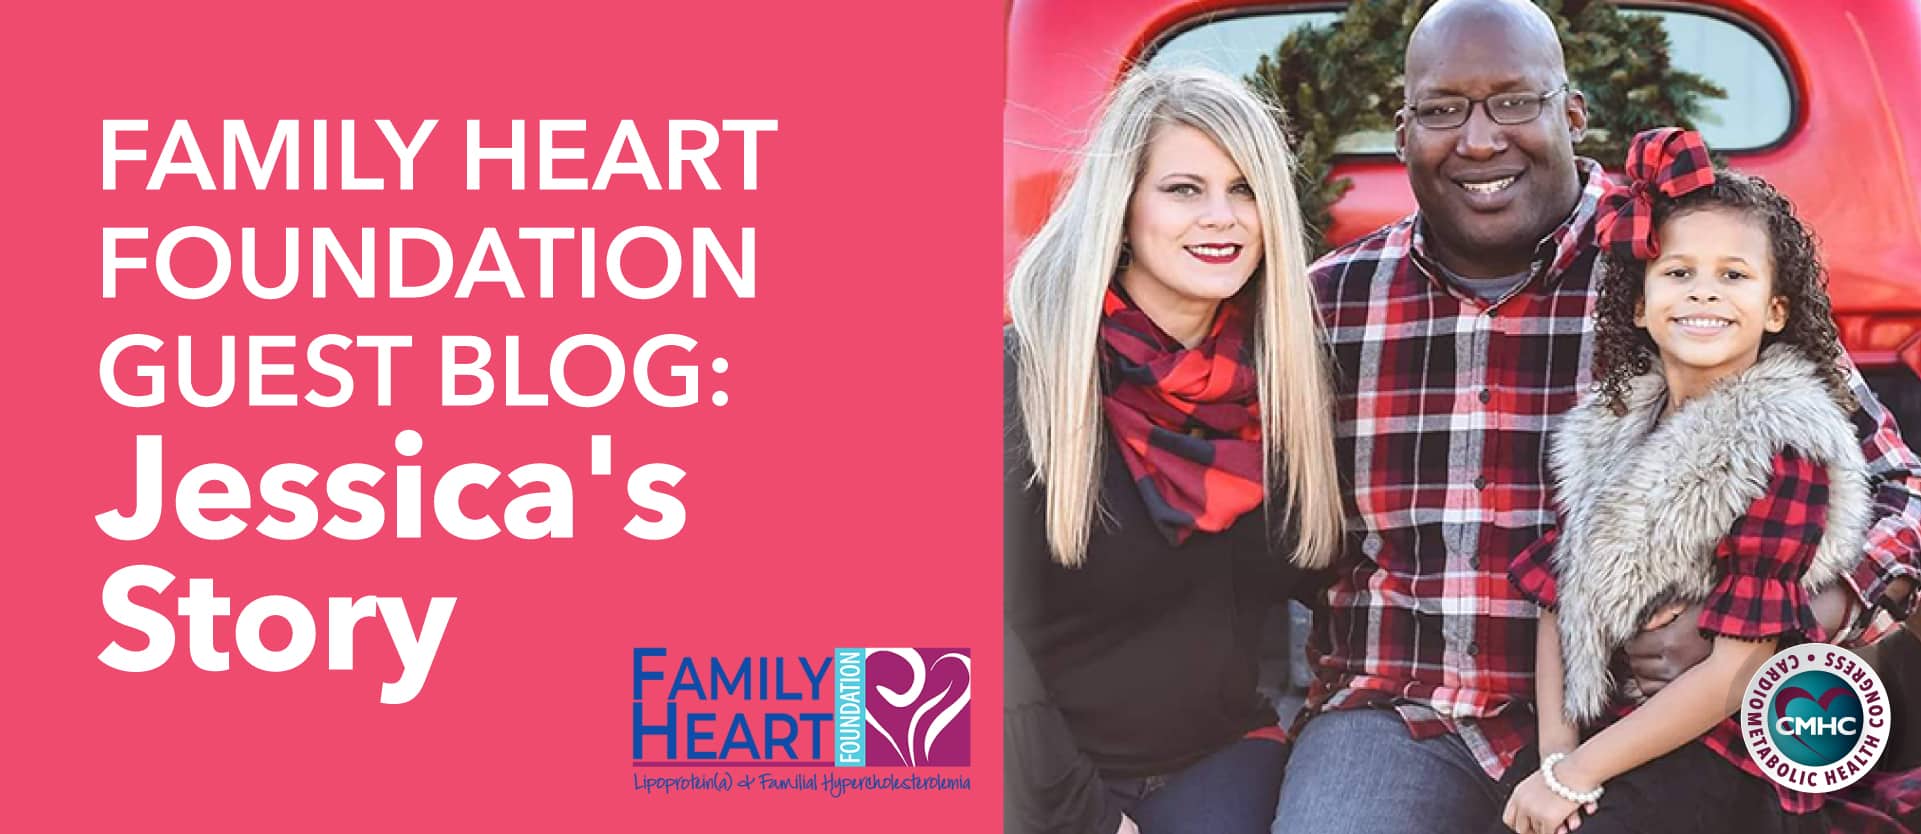 Family Heart Foundation Guest Blog: Jessica’s Story